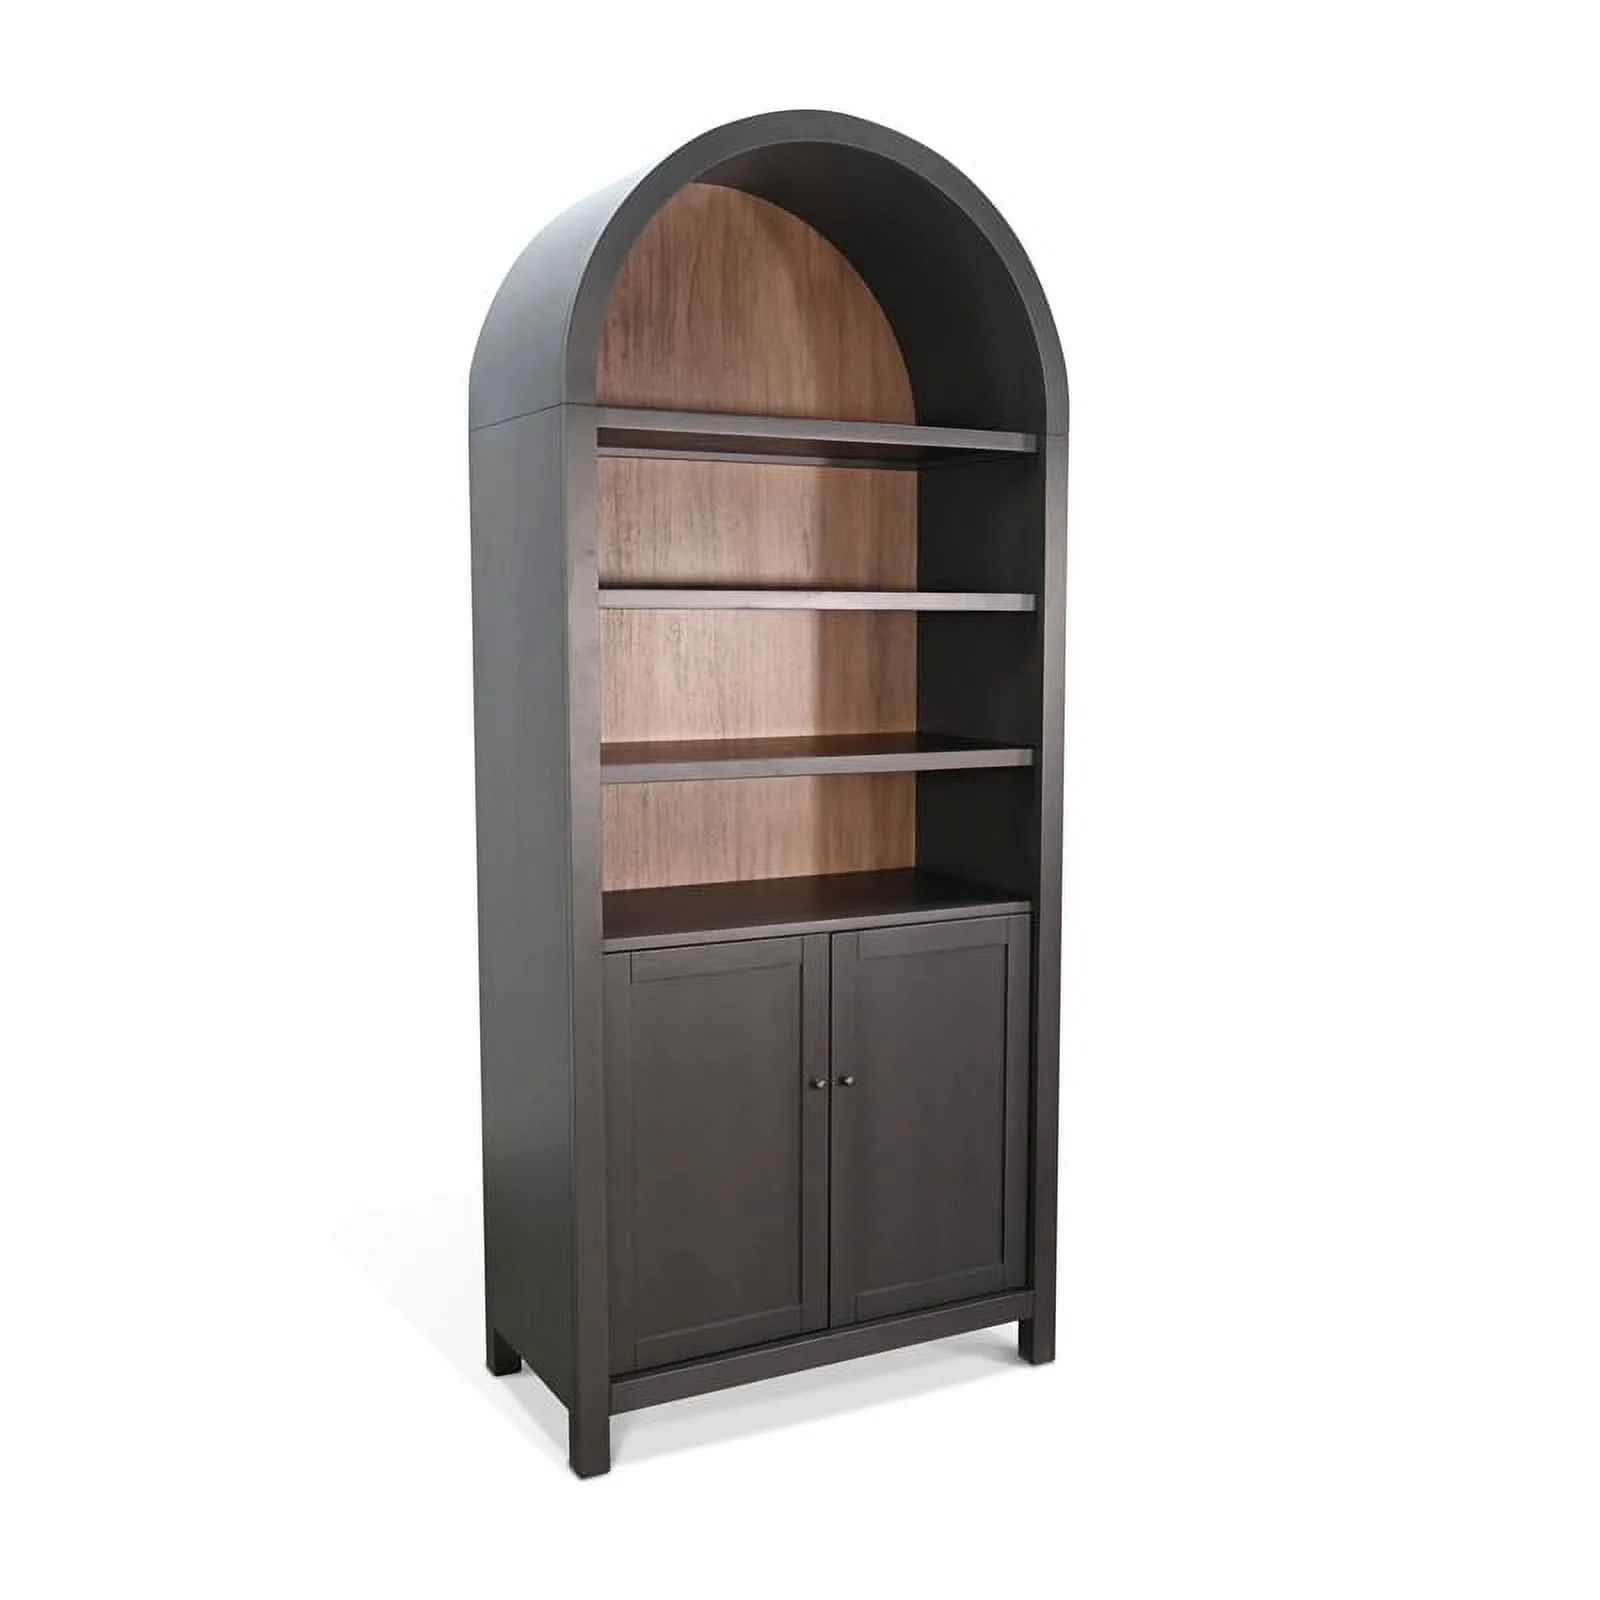 Sunny Designs Arched Display Cabinet with Doors | Walmart (US)